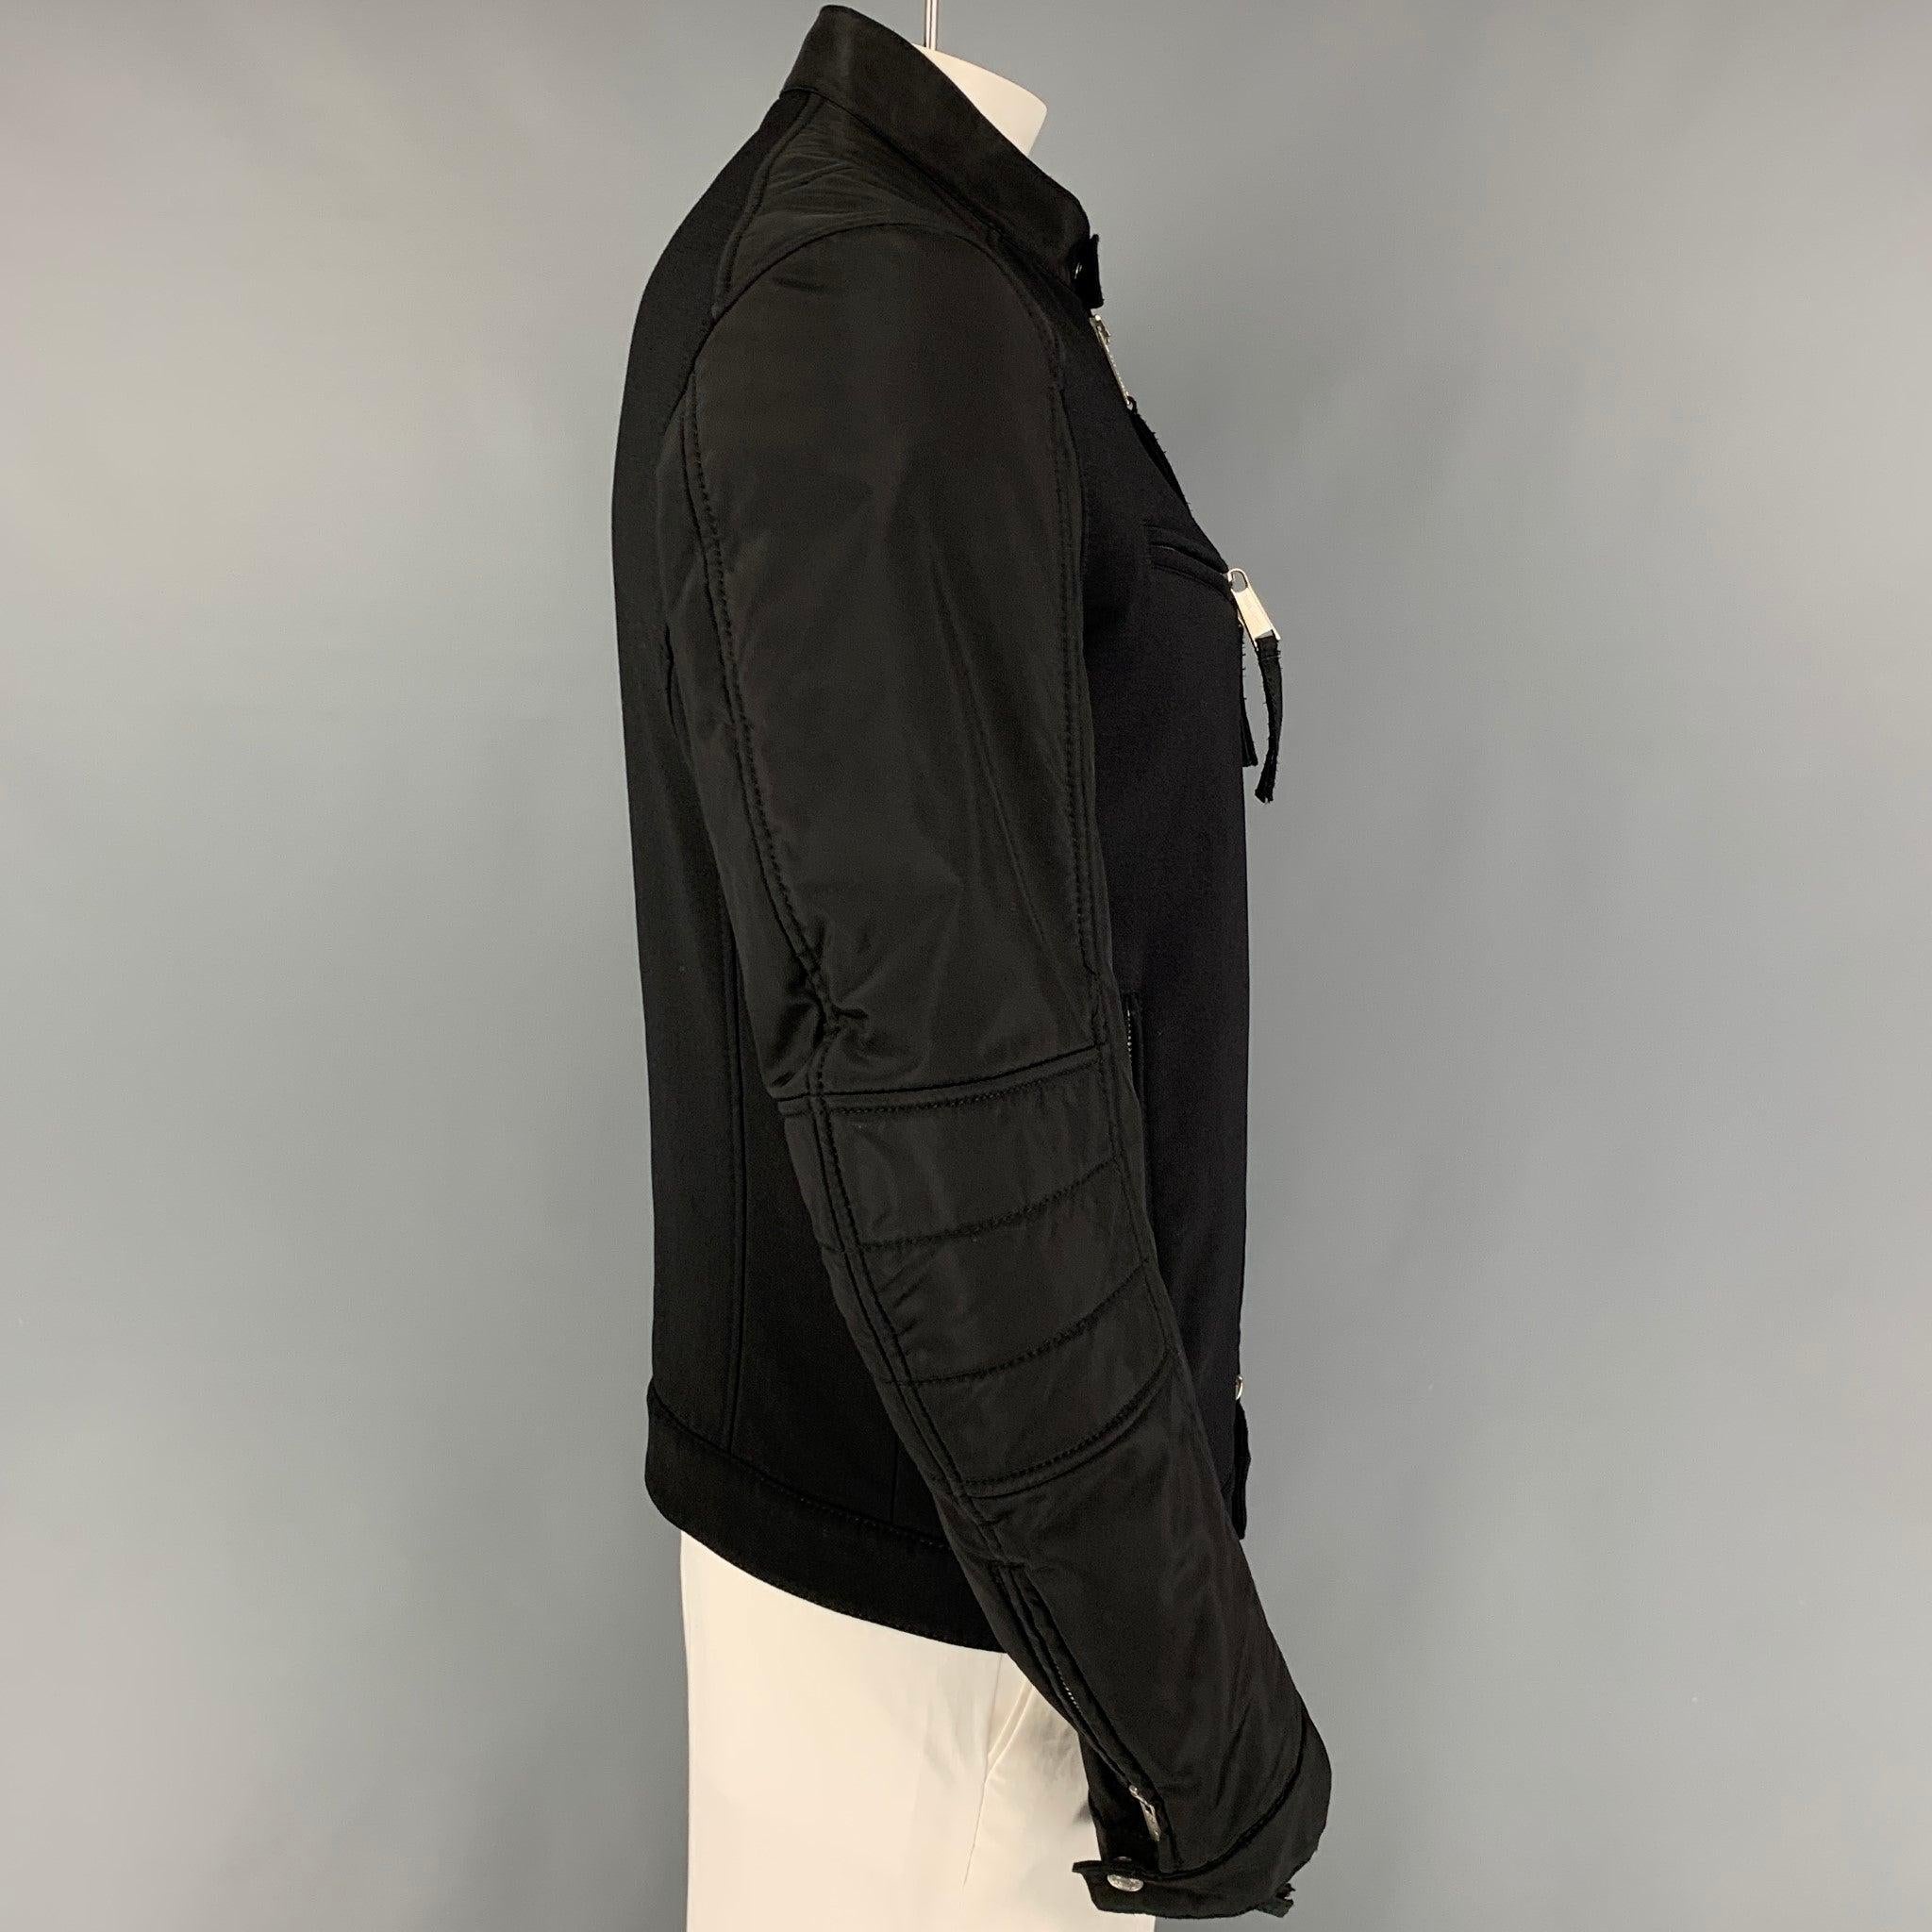 DSQUARED2 jacket comes in a black wool blend featuring a biker style, collarless, zipped sleeves, padded elbows, zipper pockets, and a full zip up closure. Made in Italy.
Good
Pre-Owned Condition. Moderate discoloration at interior.  

Marked:   54